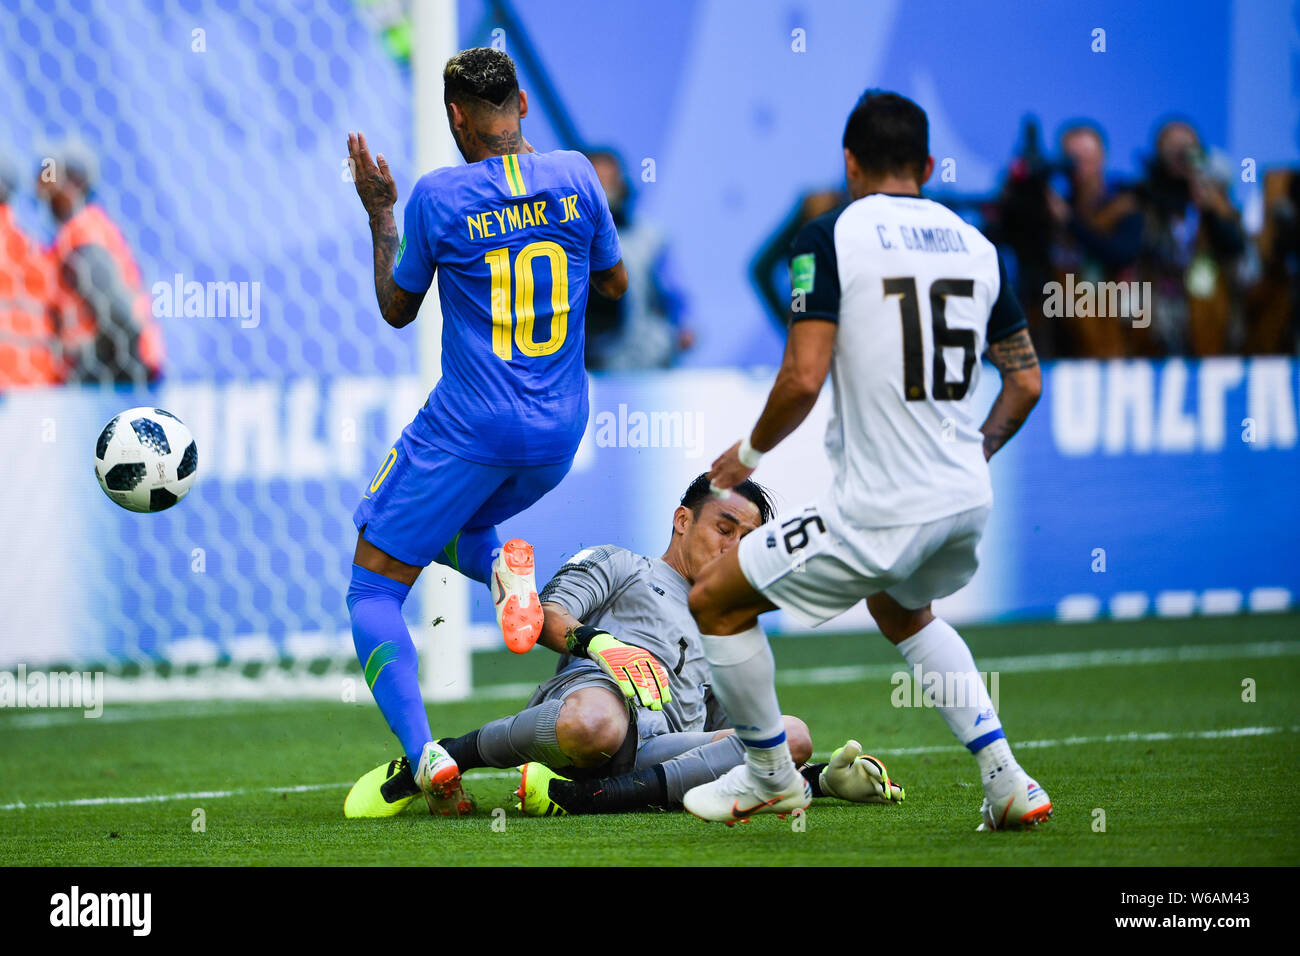 Neymar, left, of Brazil shoots to score a goal against Keylor Navas and Cristian Gamboa of Costa Rica in their Group E match during the FIFA World Cup Stock Photo